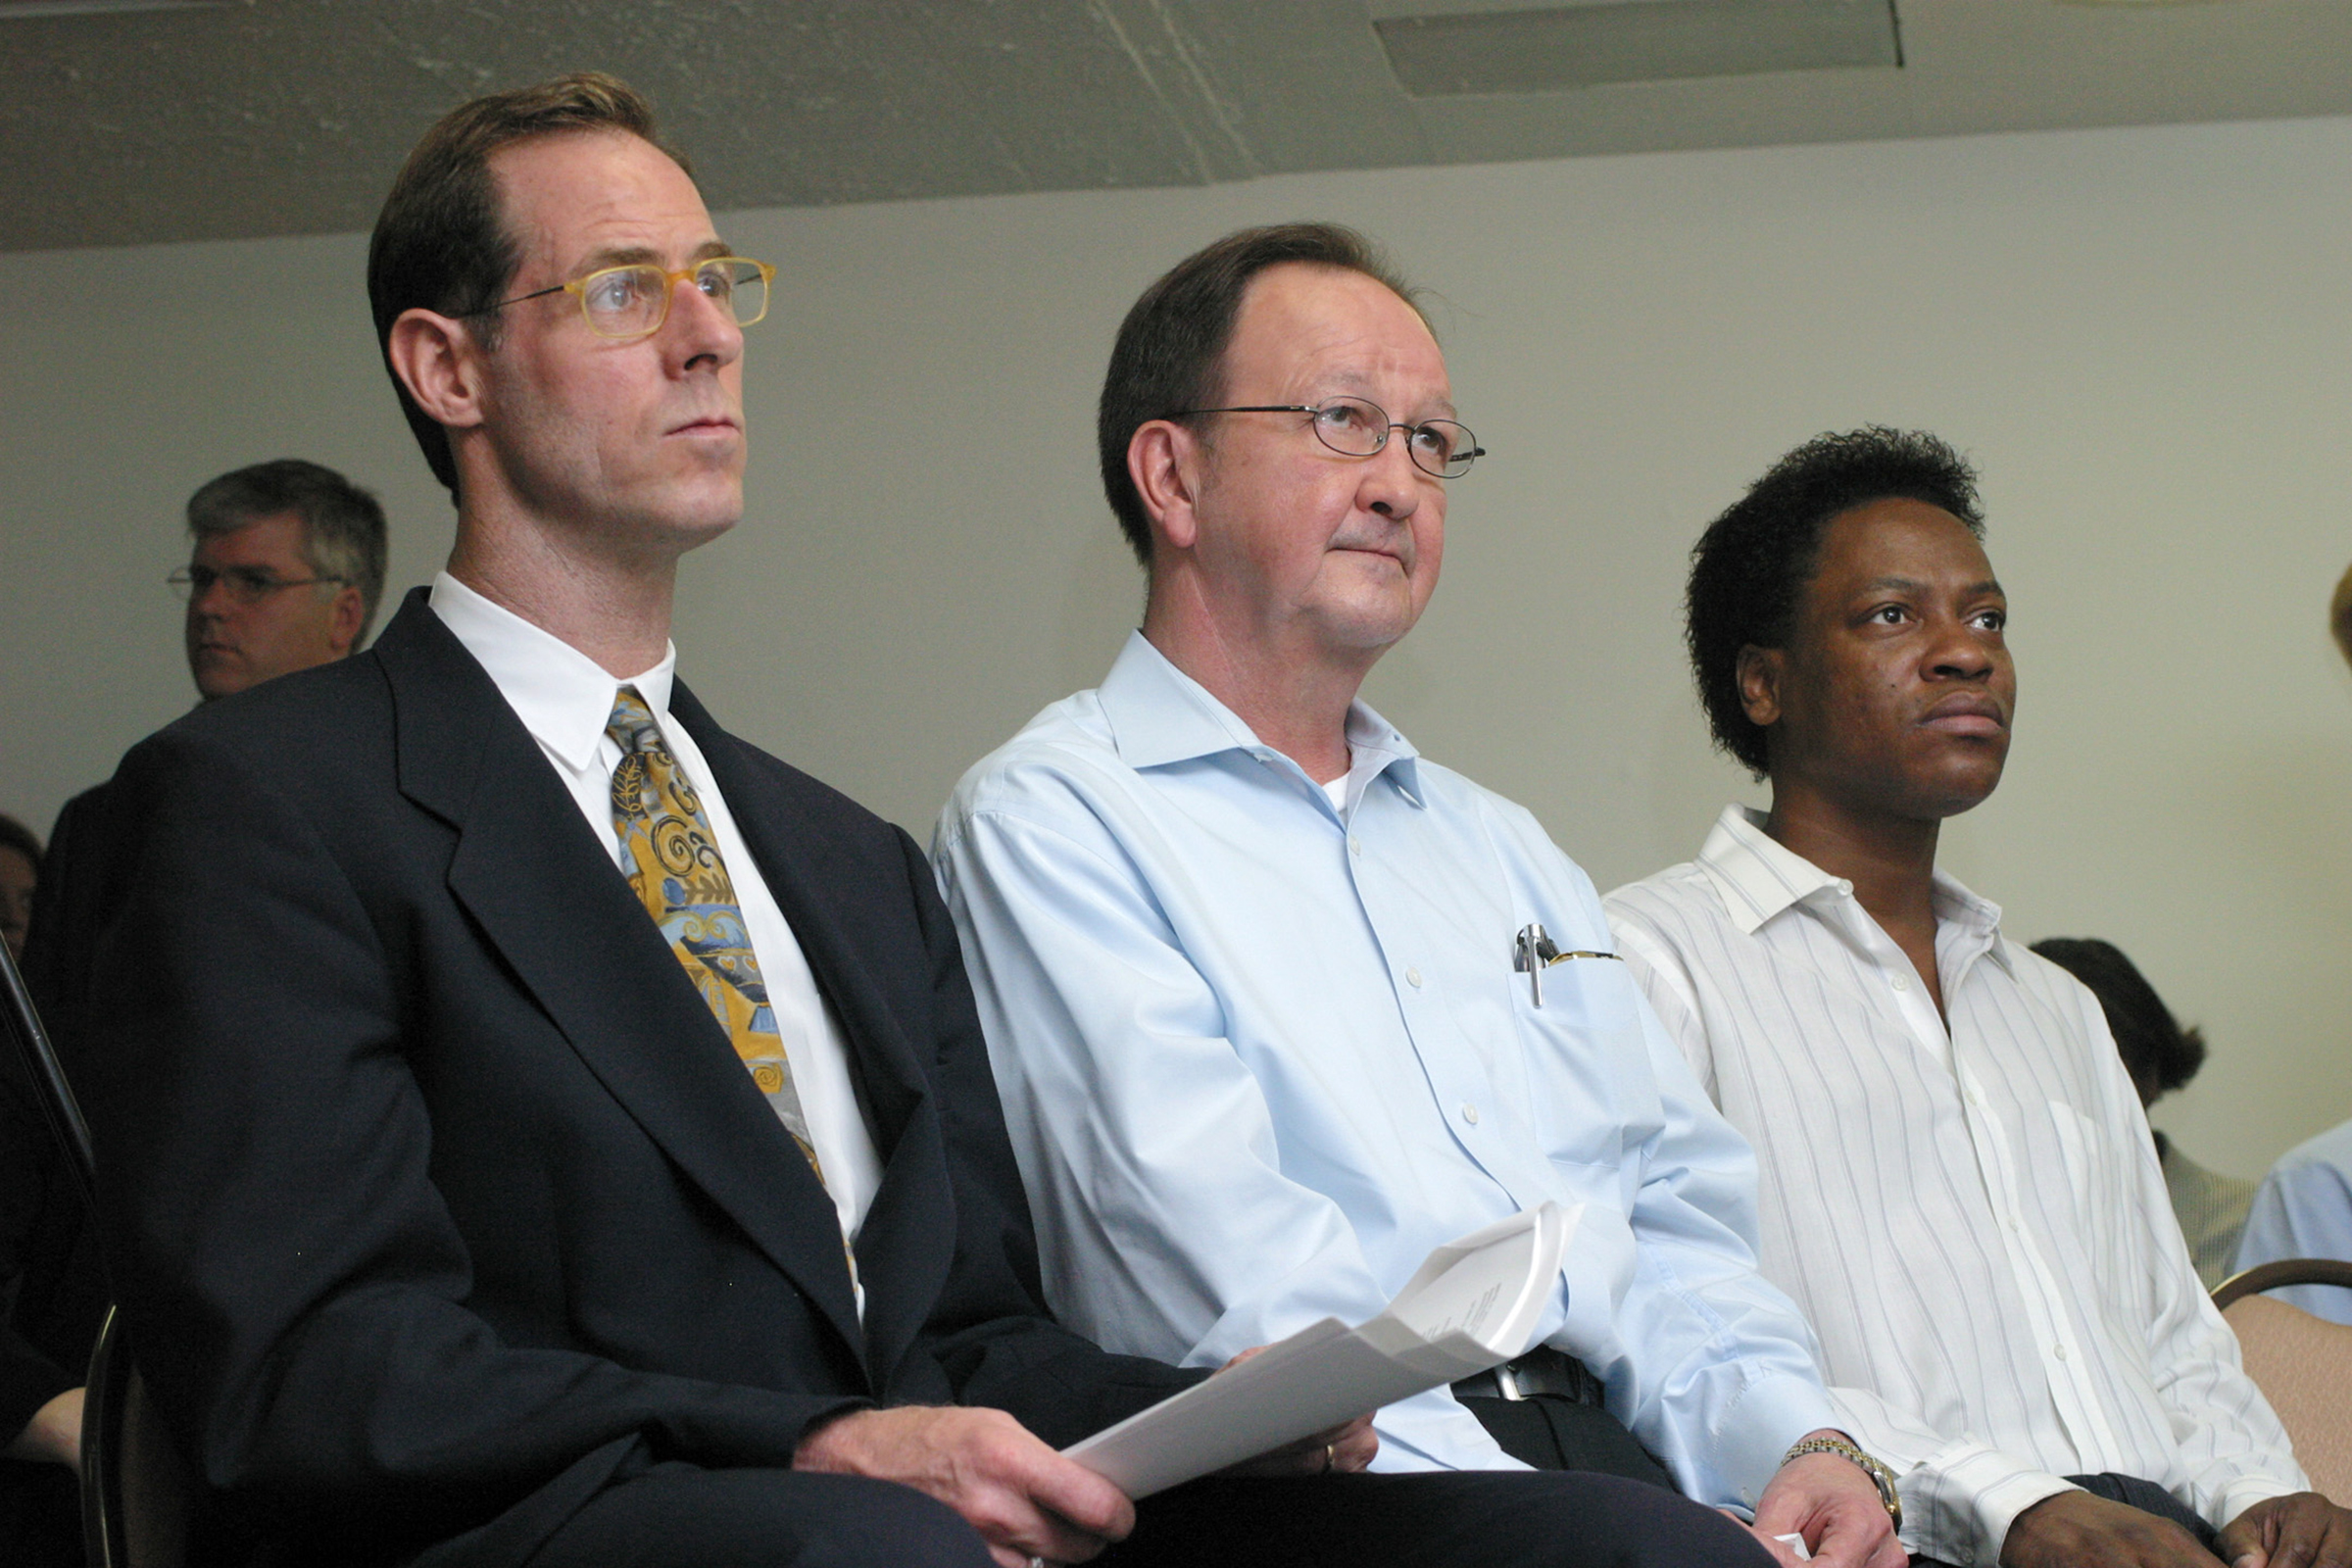 The two men who spent the night in jail in 1998 on sodomy charges, John Lawrence, center, and Tyron Garner, right, sit with their attorney Lee Taft, left, during a press conference in Houston on June 26, 2003. (Michael Stravato—AP)